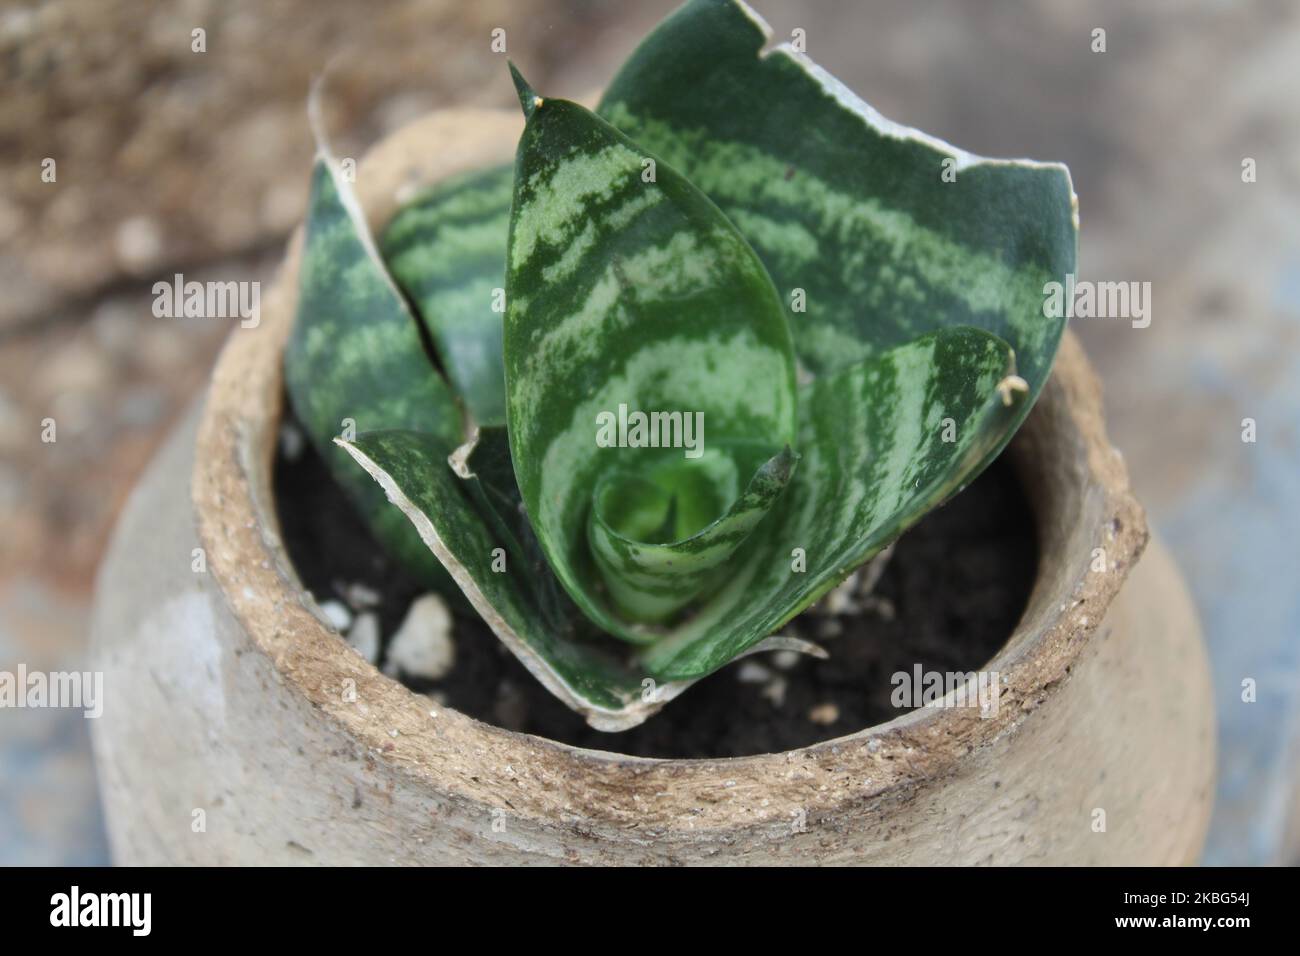 Dwarf variety snake plant in a small pot Stock Photo